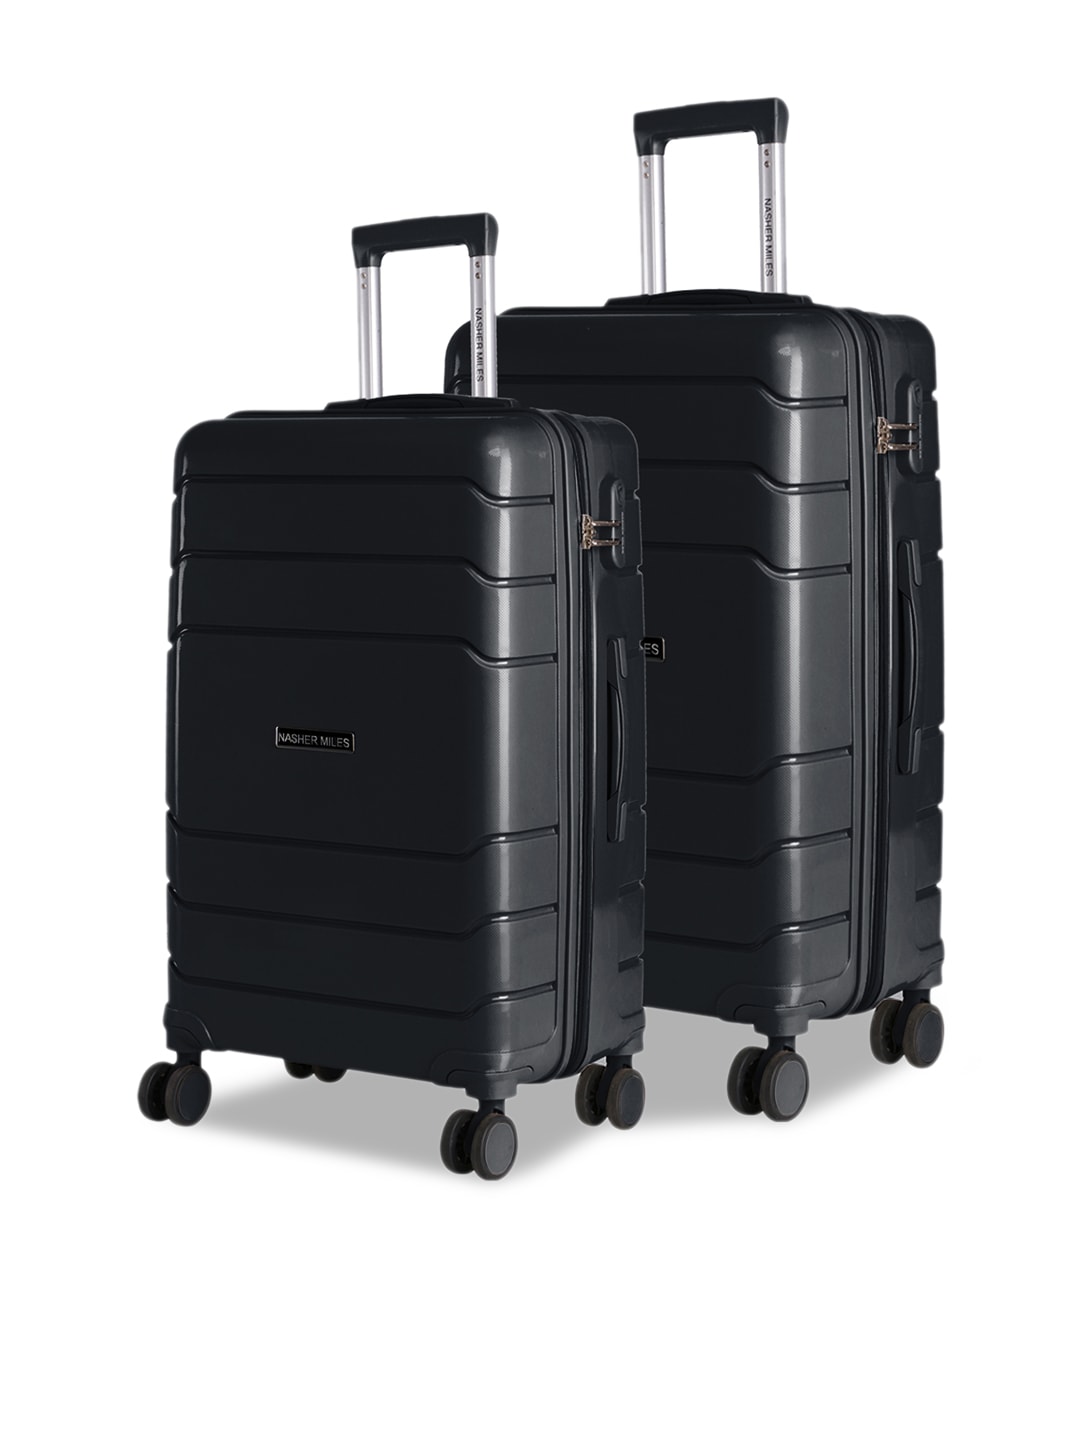 Nasher Miles Unisex Set of 2 Black Hard-Sided Trolley Bags Price in India